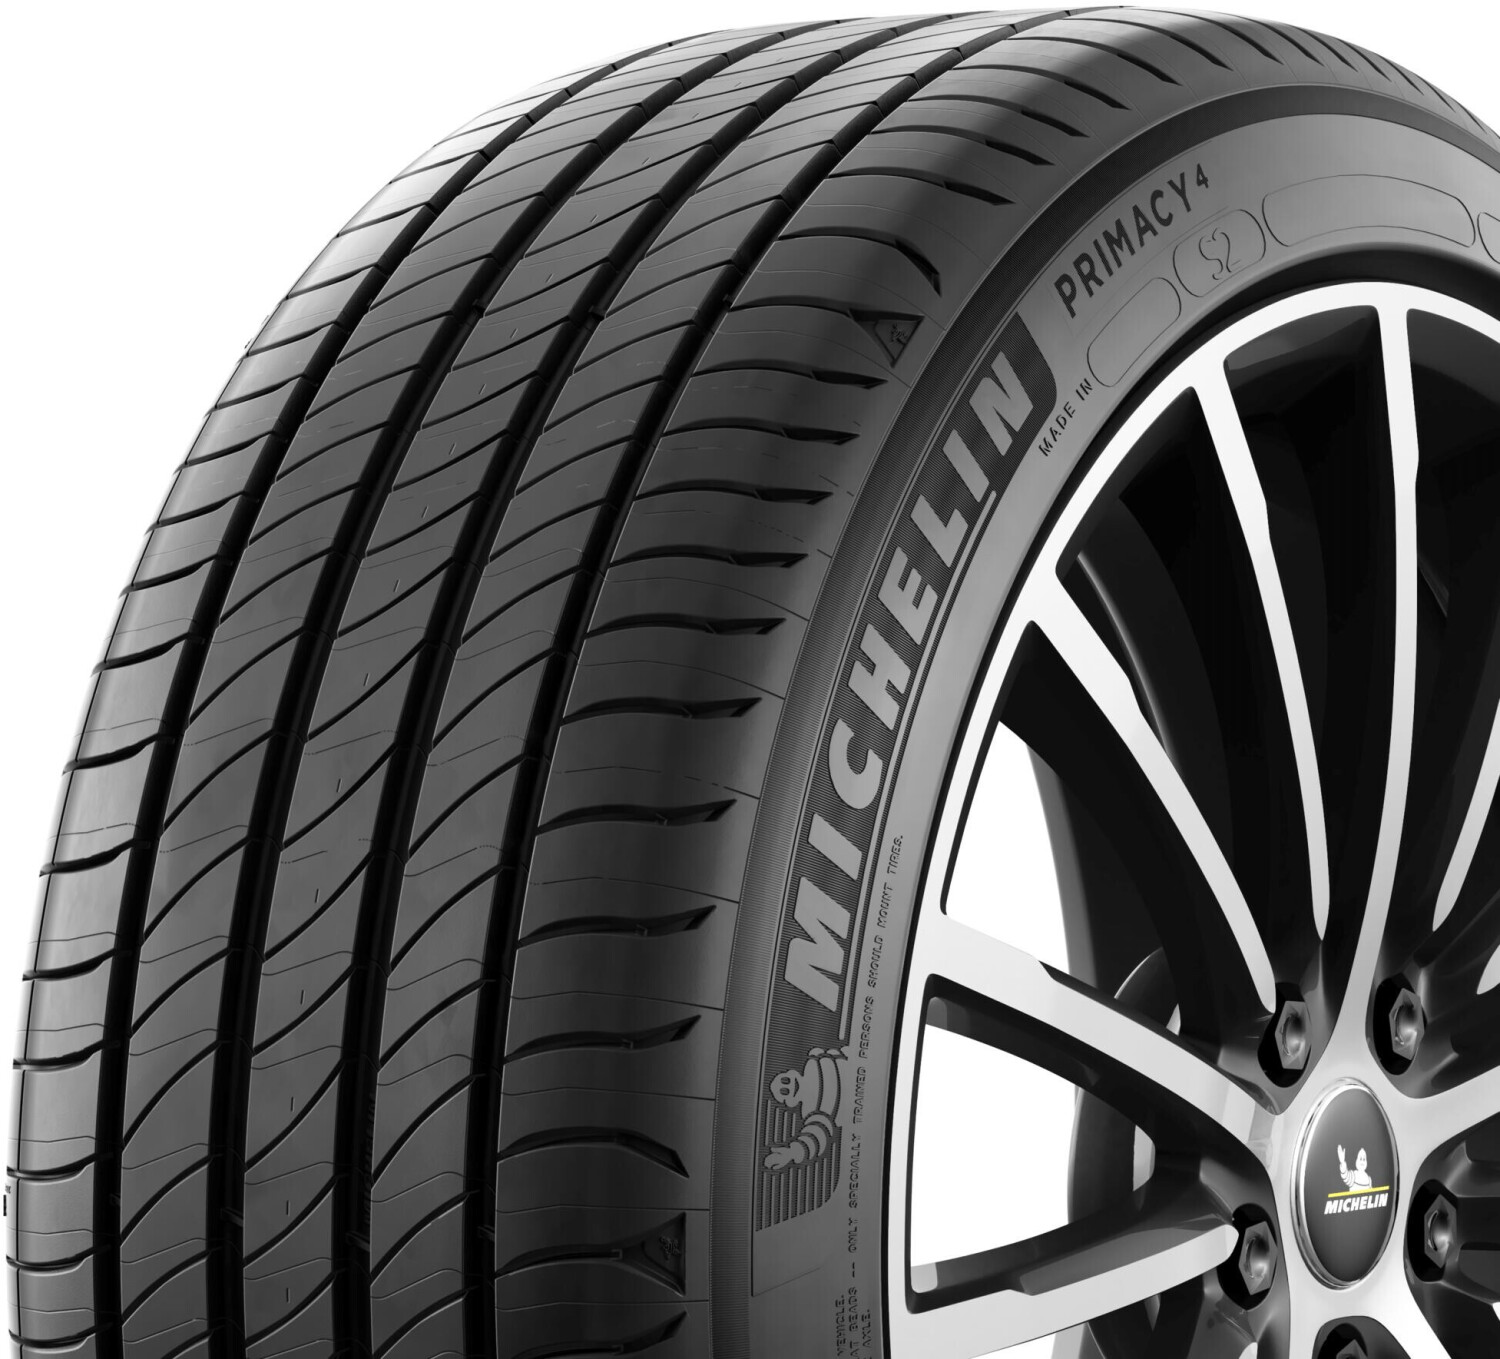 Deals R17 225/45 4 from 94V S1 Michelin – (Today) Buy on Primacy XL Best £108.51